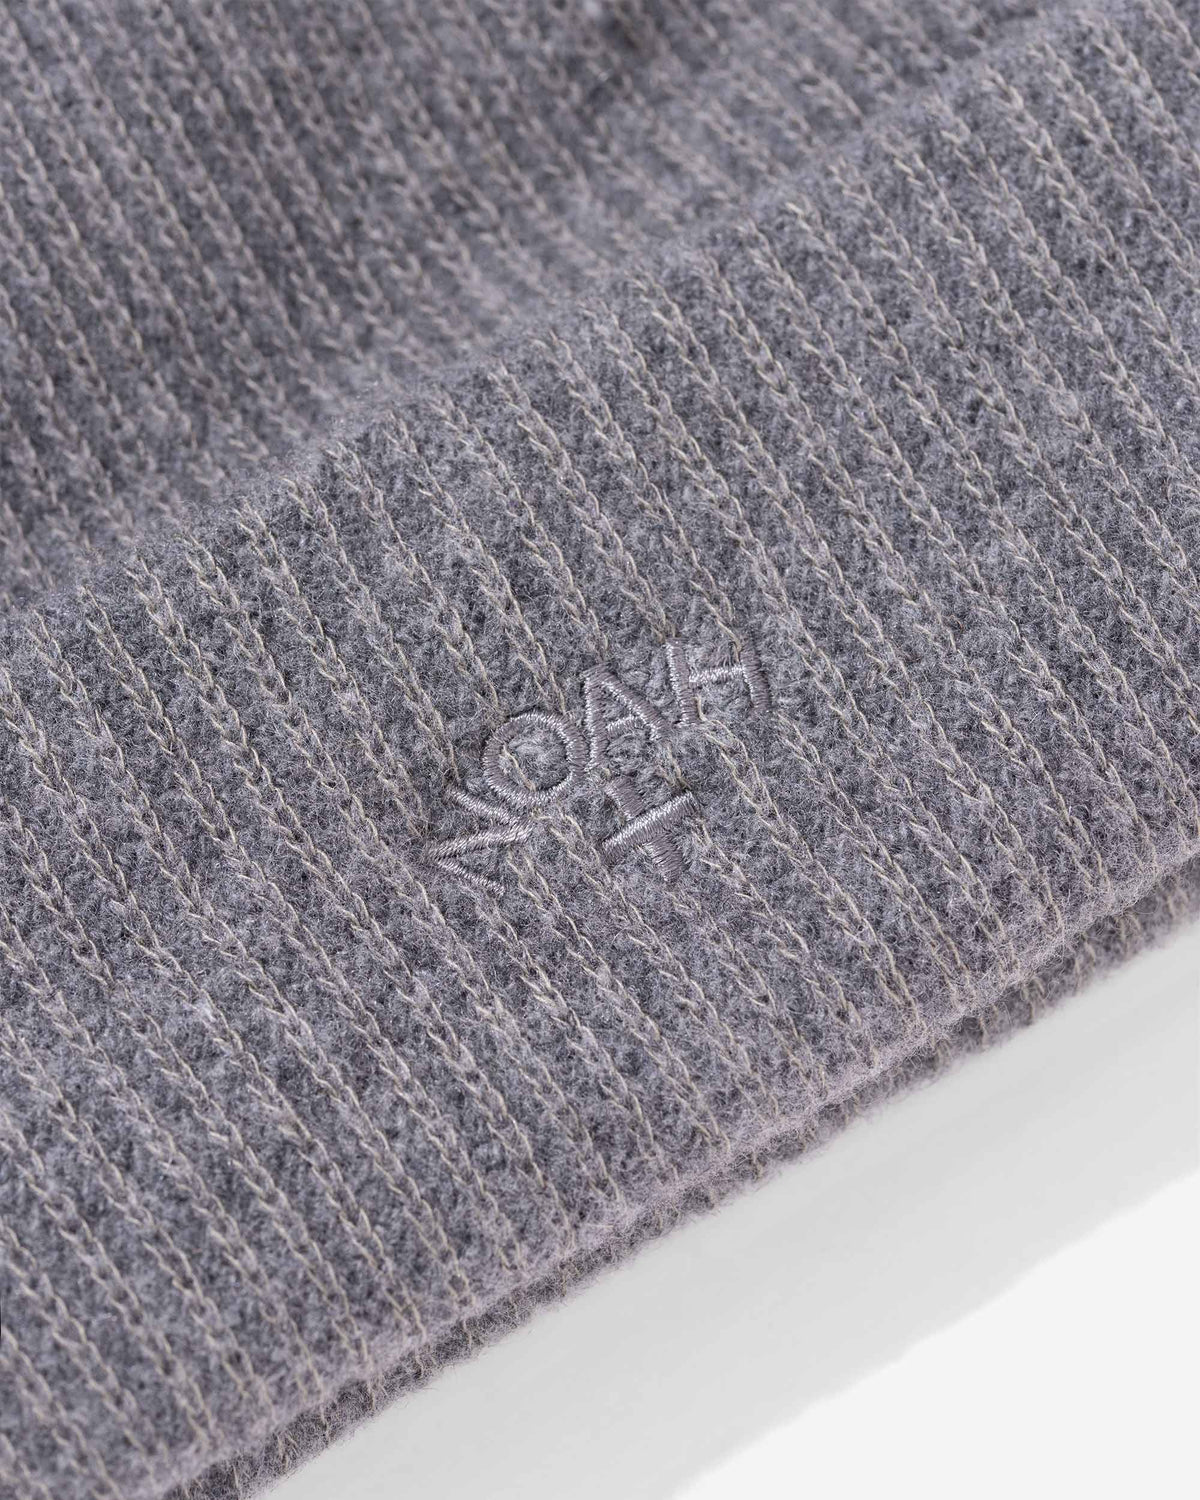 Recycled Cashmere Beanie